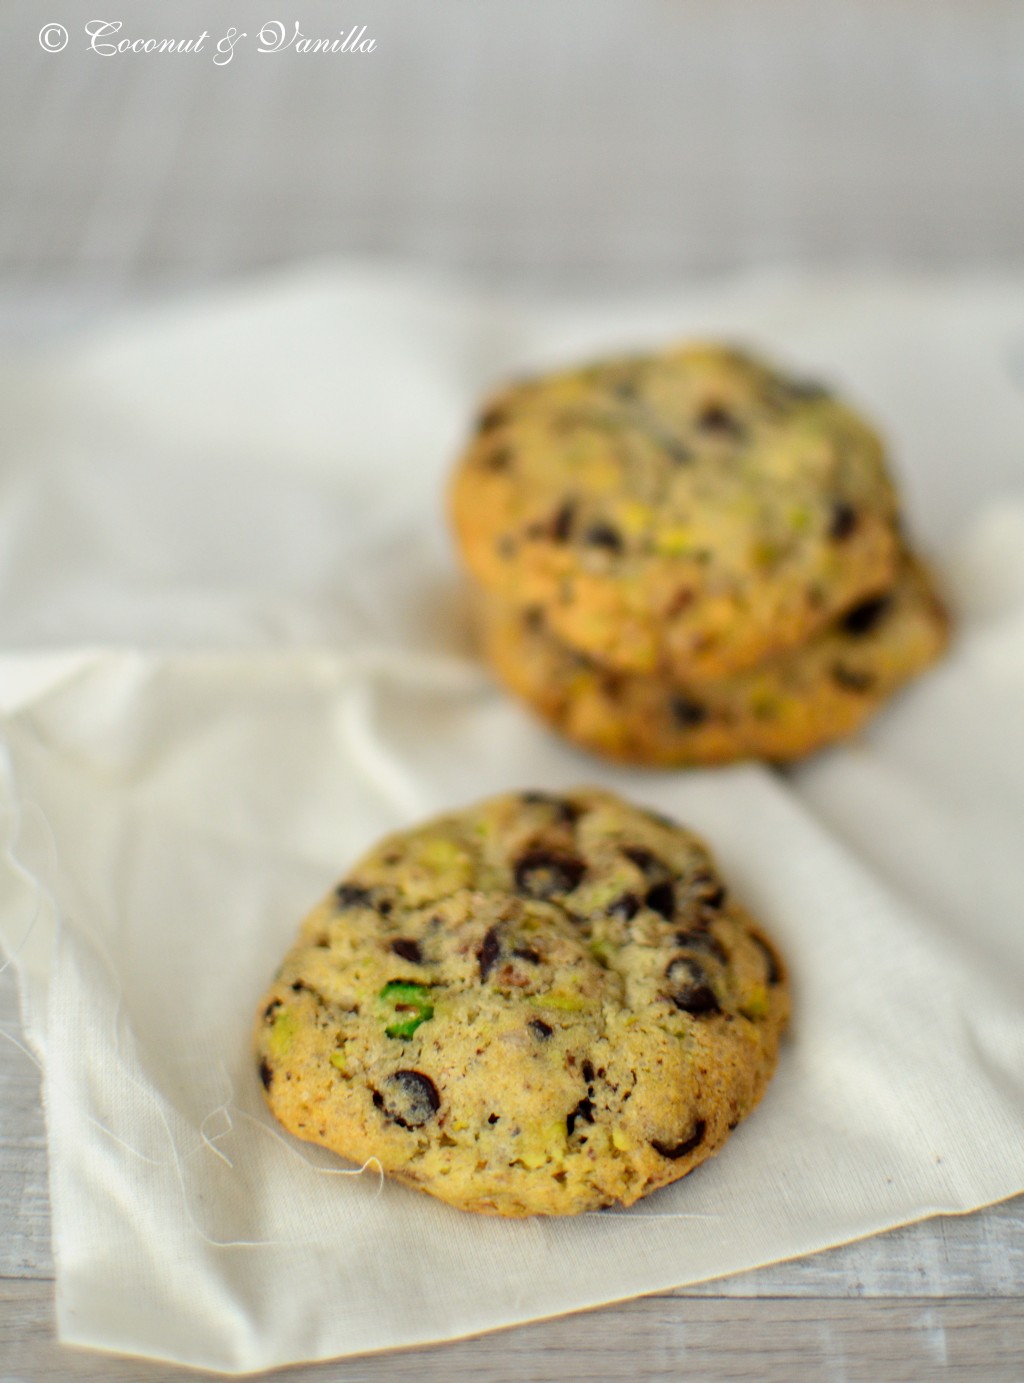 Pistachio and Dark Chocolate Chip Cookies with Smoked Sea Salt